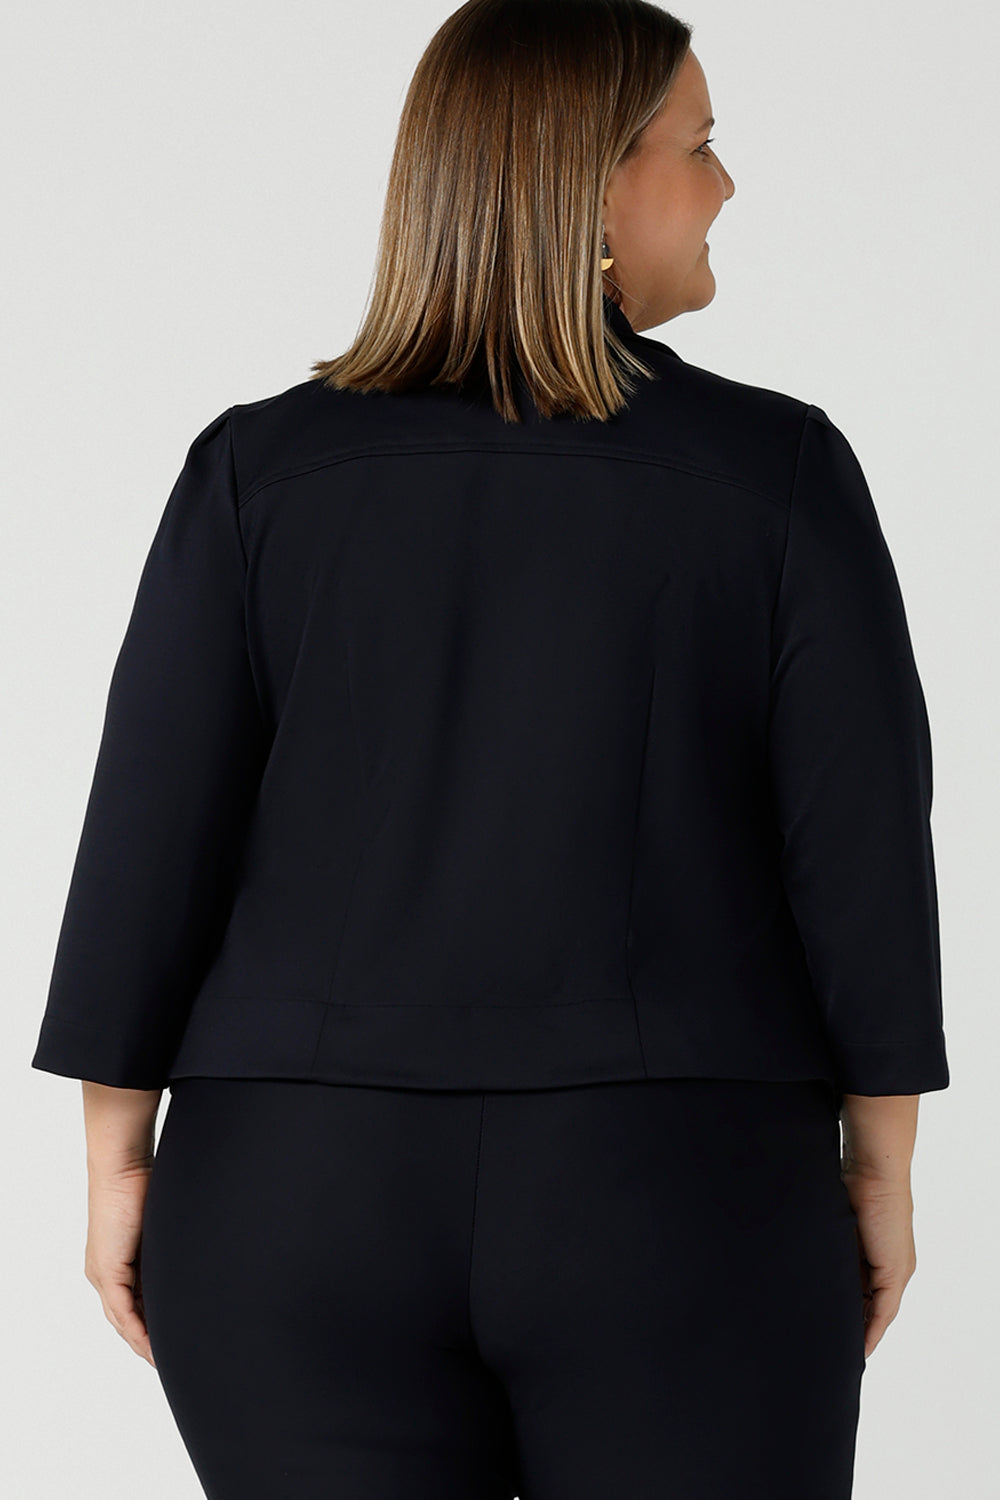 Back view of a curvy size 18 woman wears a tailored navy Lenni Jacket in Ponte. A tailored jacket for work in deep navy. Comfortable workwear for women sizes 8 - 24.